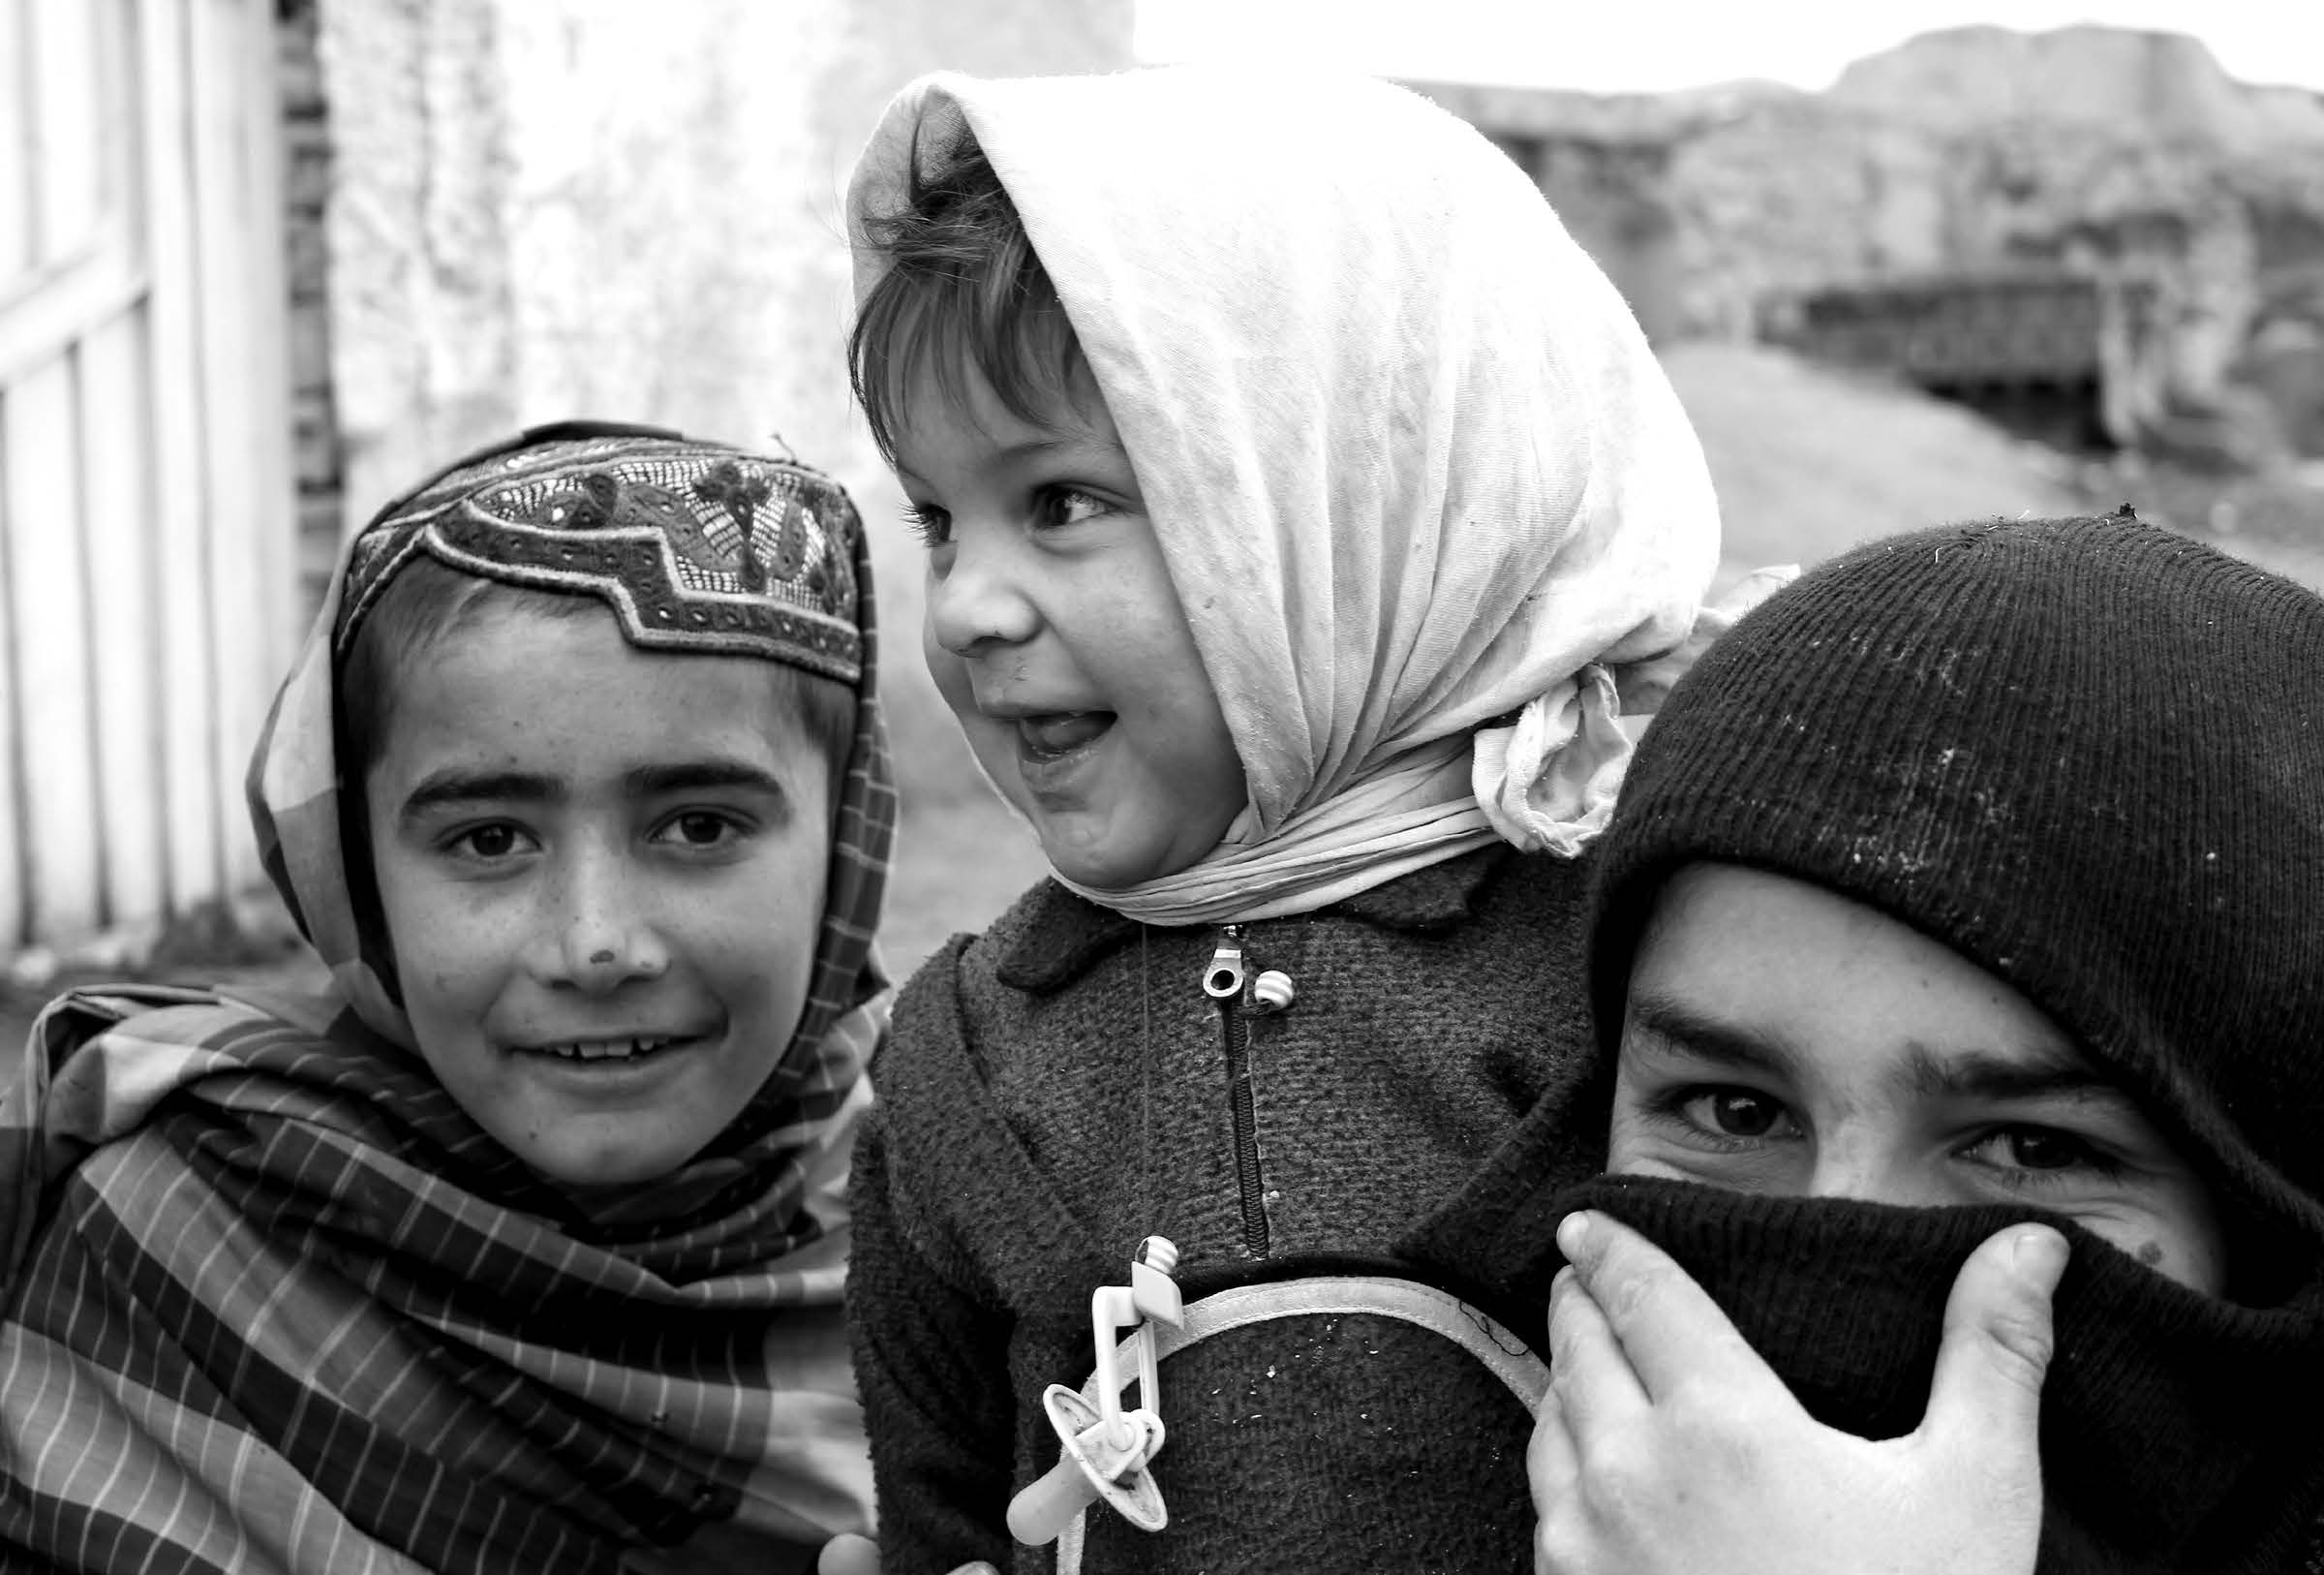 Afghan children greet American soldiers visiting their village. Courtesy of J. Joseph DuWors.